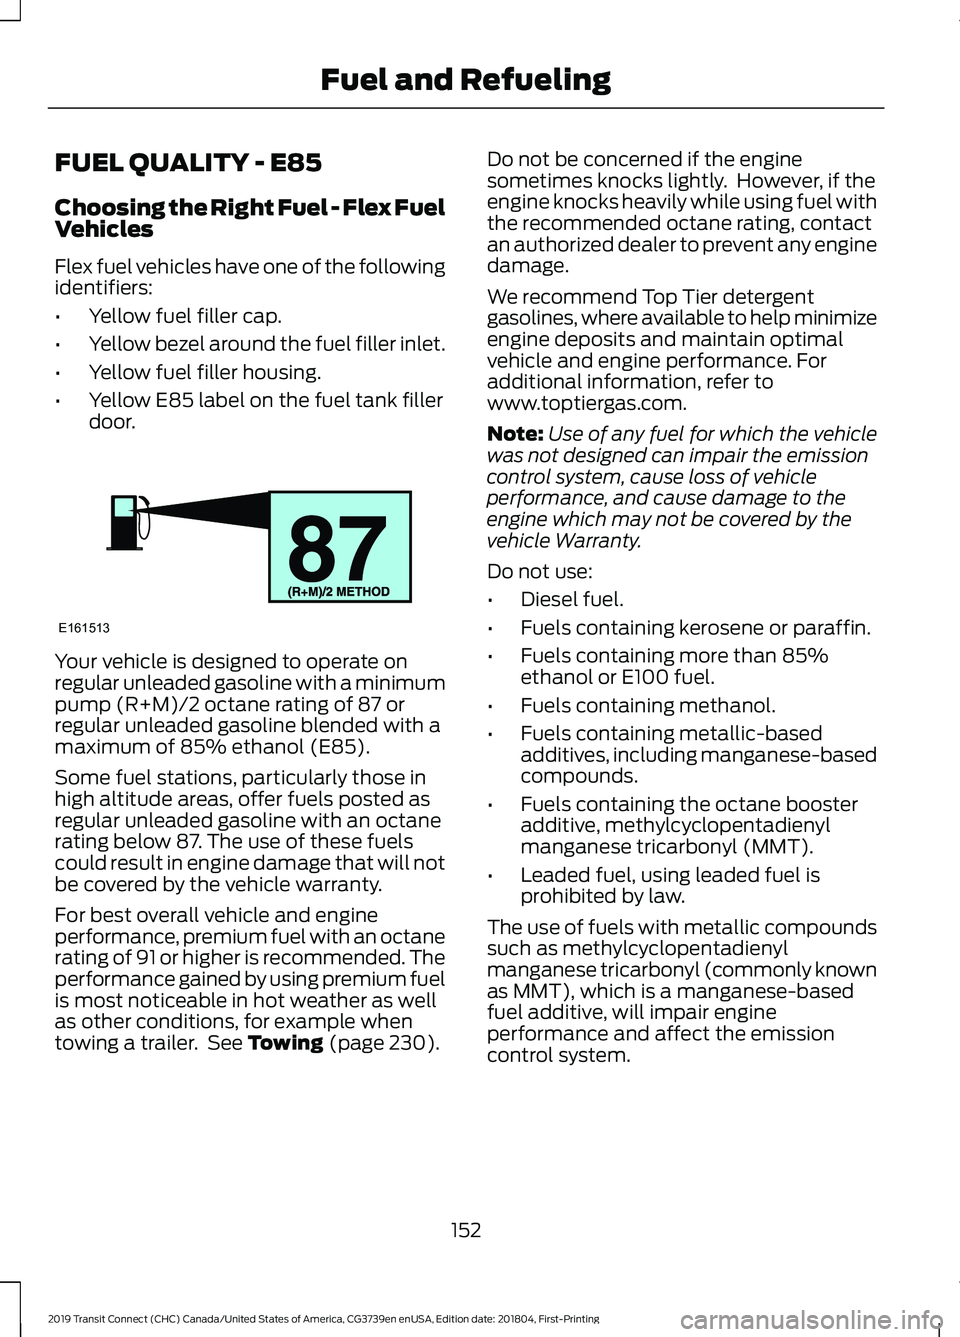 FORD TRANSIT CONNECT 2019  Owners Manual FUEL QUALITY - E85
Choosing the Right Fuel - Flex Fuel
Vehicles
Flex fuel vehicles have one of the following
identifiers:
•
Yellow fuel filler cap.
• Yellow bezel around the fuel filler inlet.
•